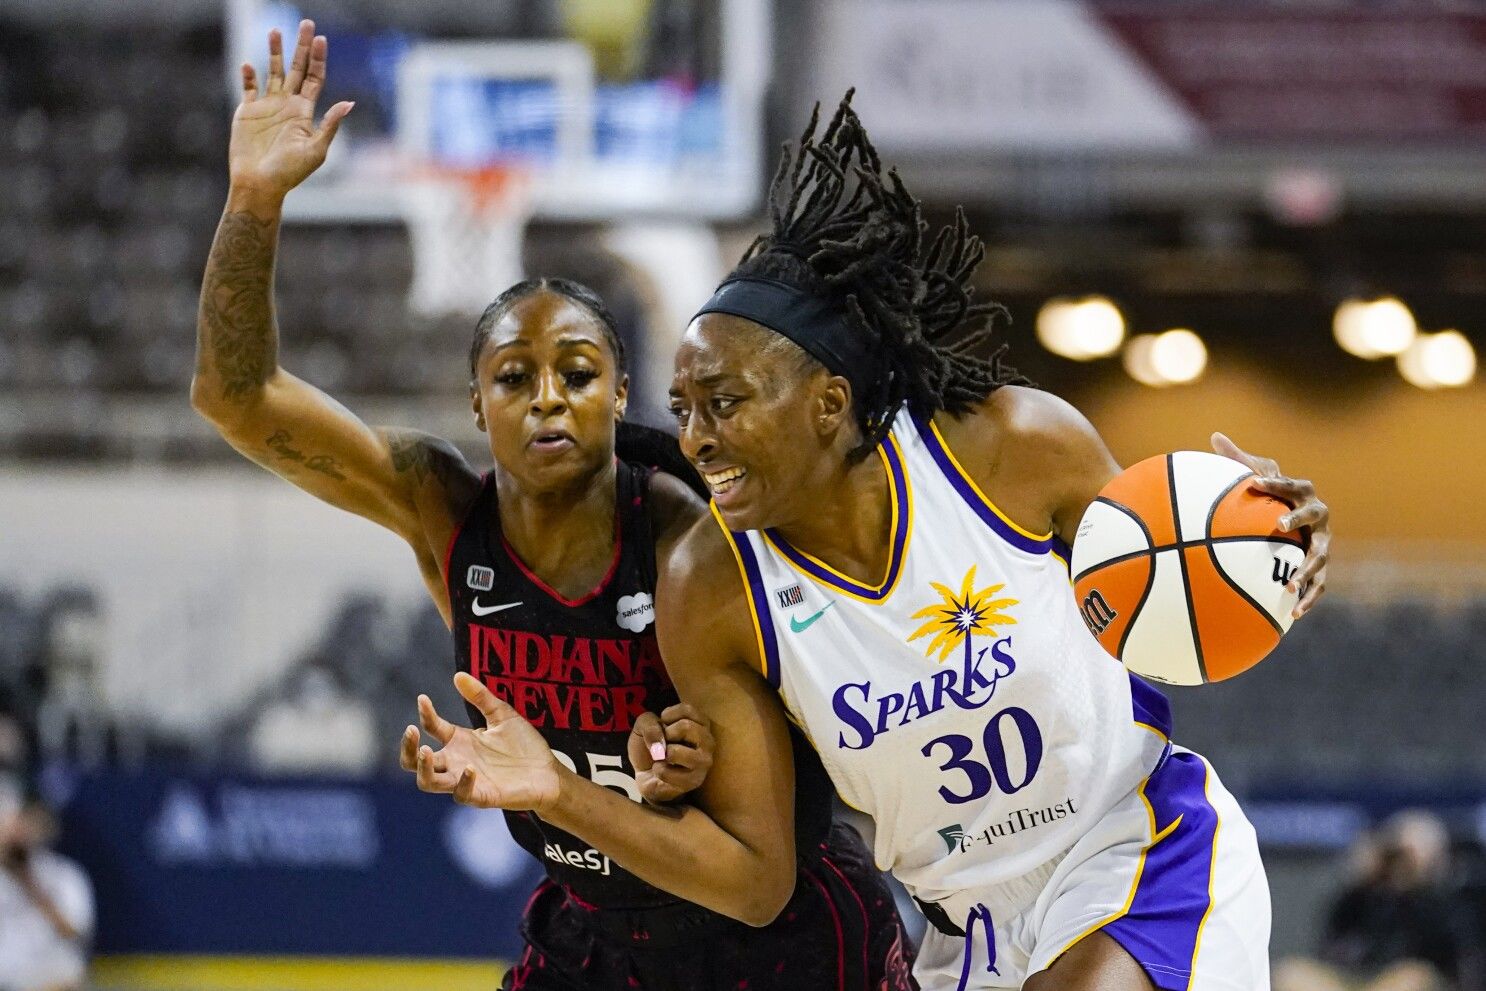 Indiana Fever vs Los Angeles Sparks Prediction, Betting Tips and Odds | 8 MAY, 2022